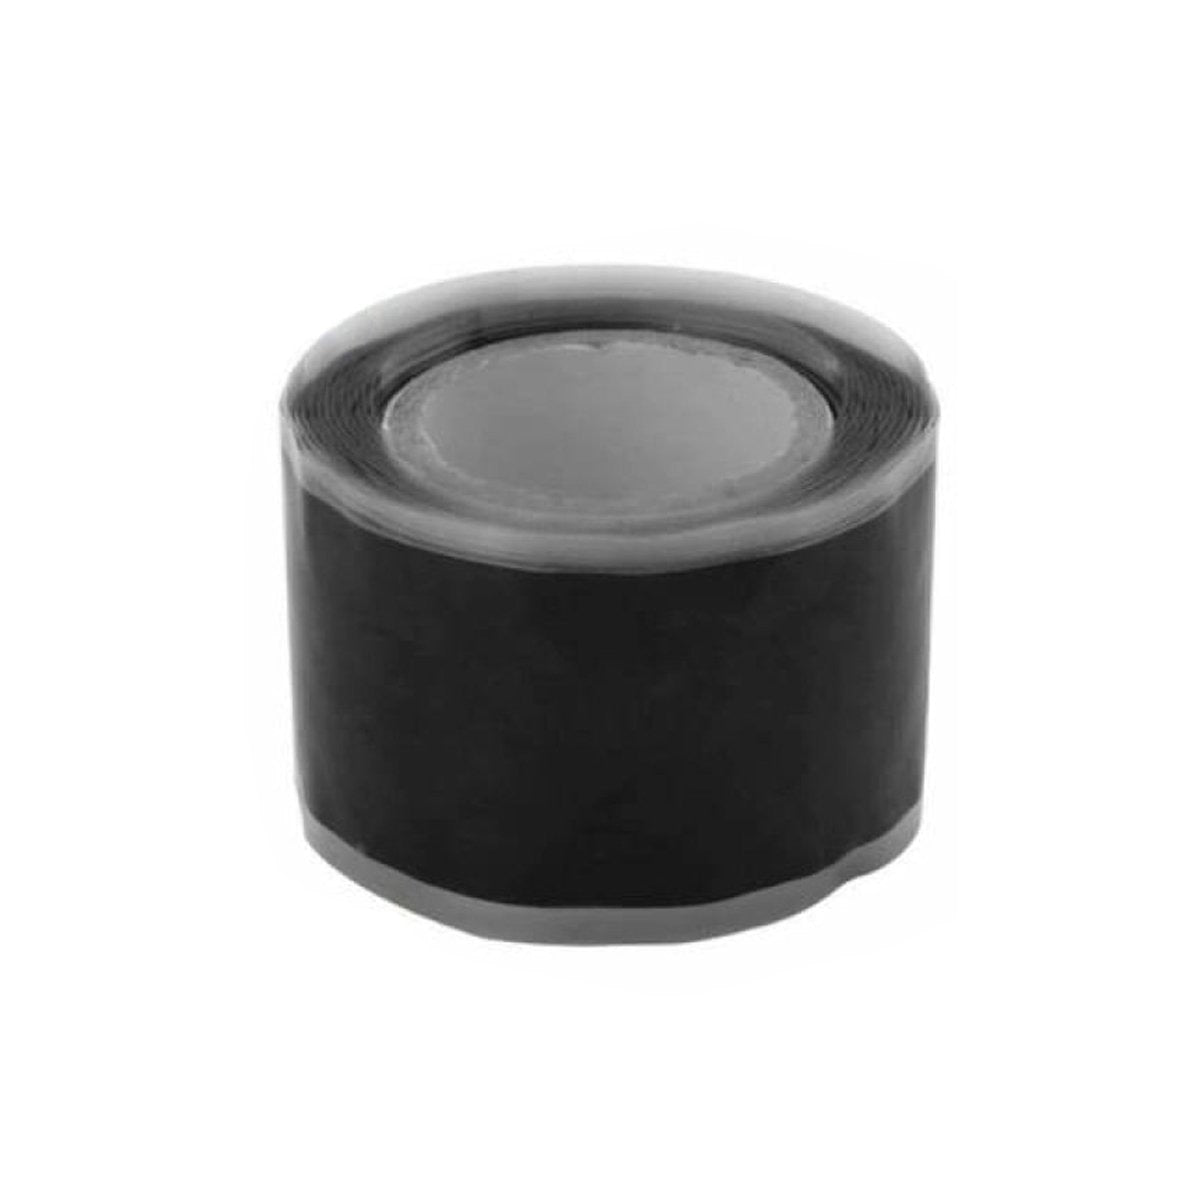 2Pcs Multi-Purpose Silicone Tape Strong Black Silicon Rubber Waterproof Other